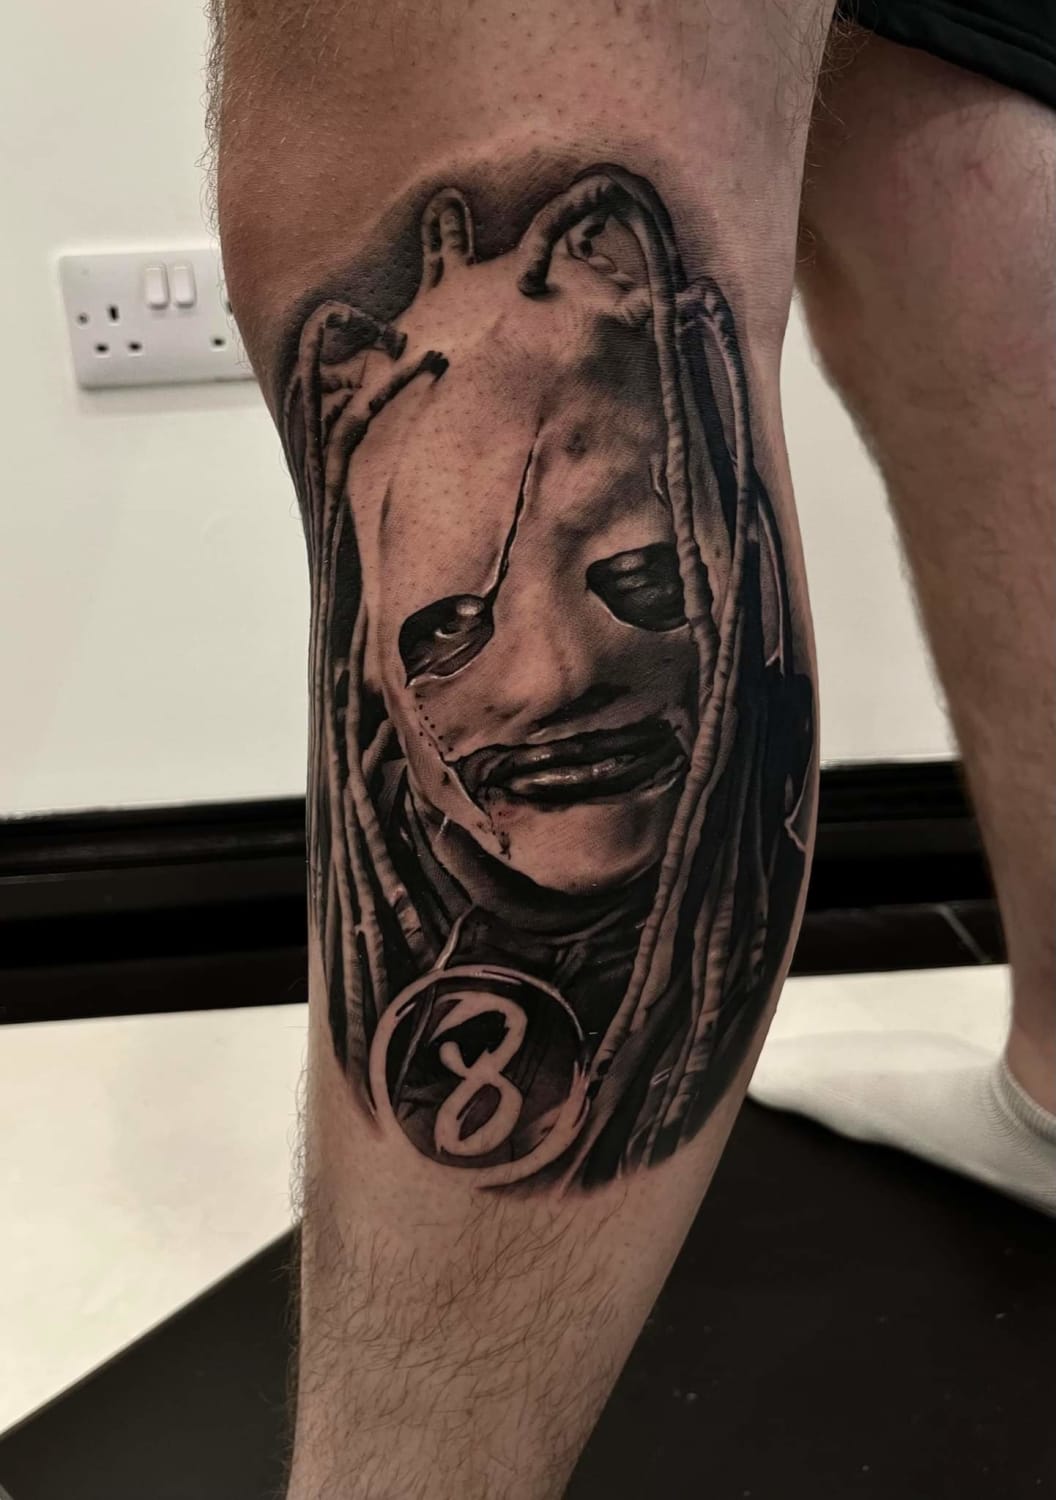 Corey Taylor Slipknot tattoo I had done today by Ryan March @ Beneath The Skin, Skegness, UK